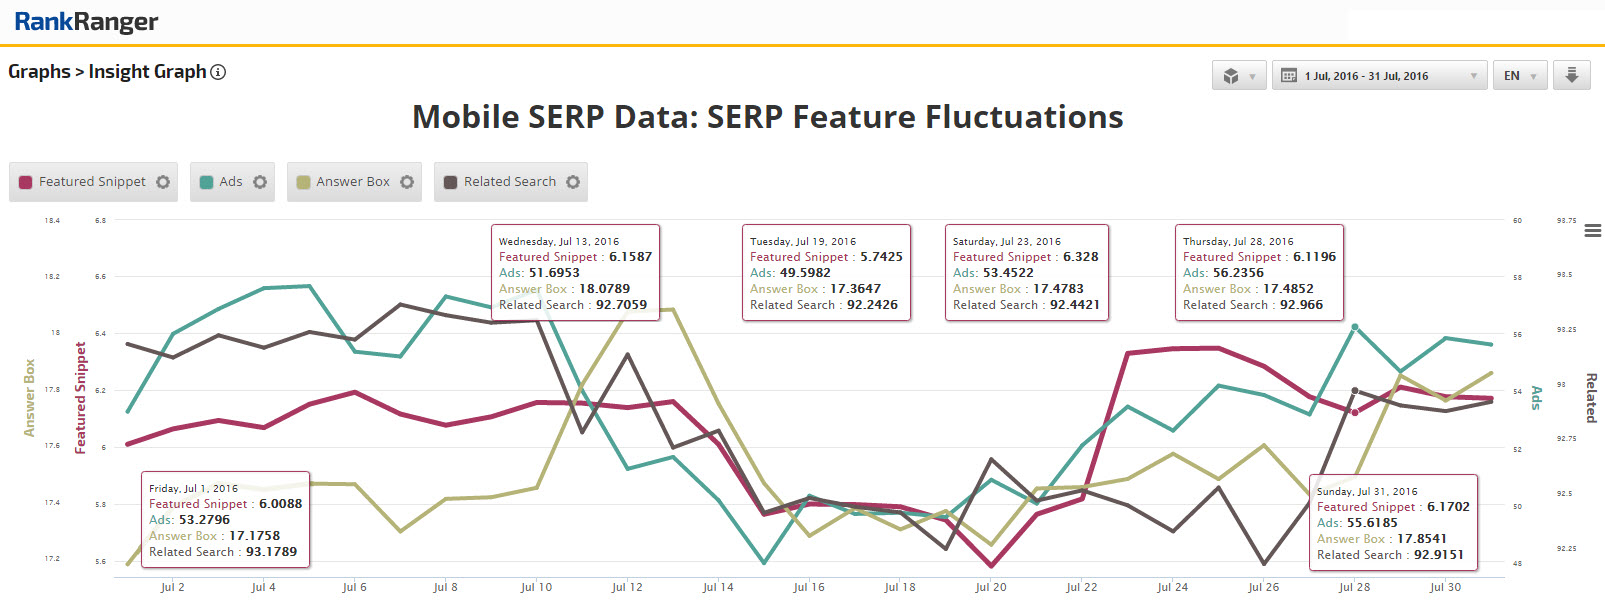 A Second Series of Mobile SERP Feature Fluctuations